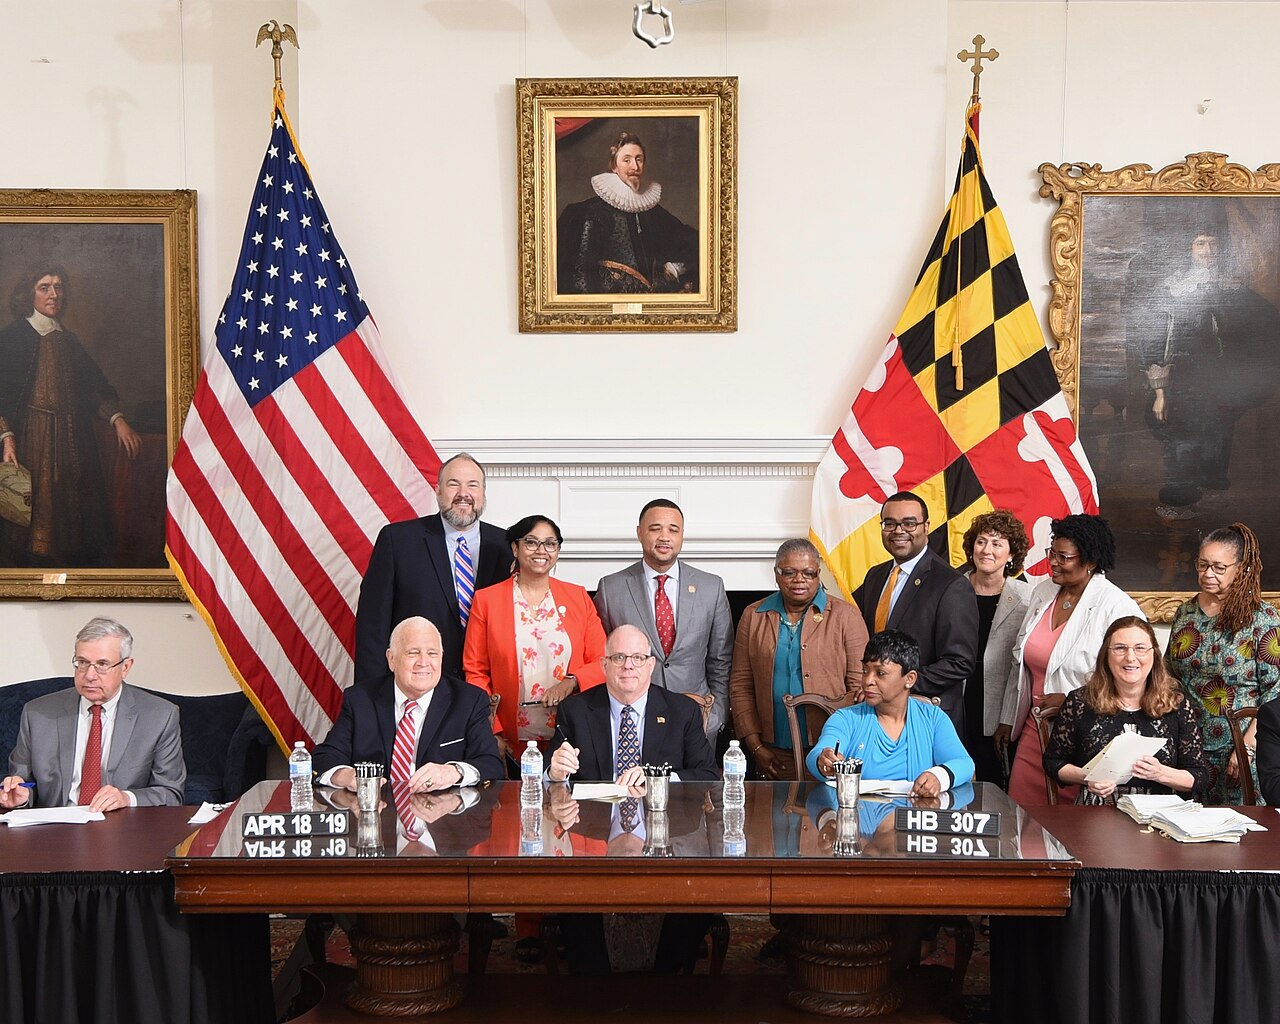 Image of Governor Hogan and others at House Bill 307 Signing.